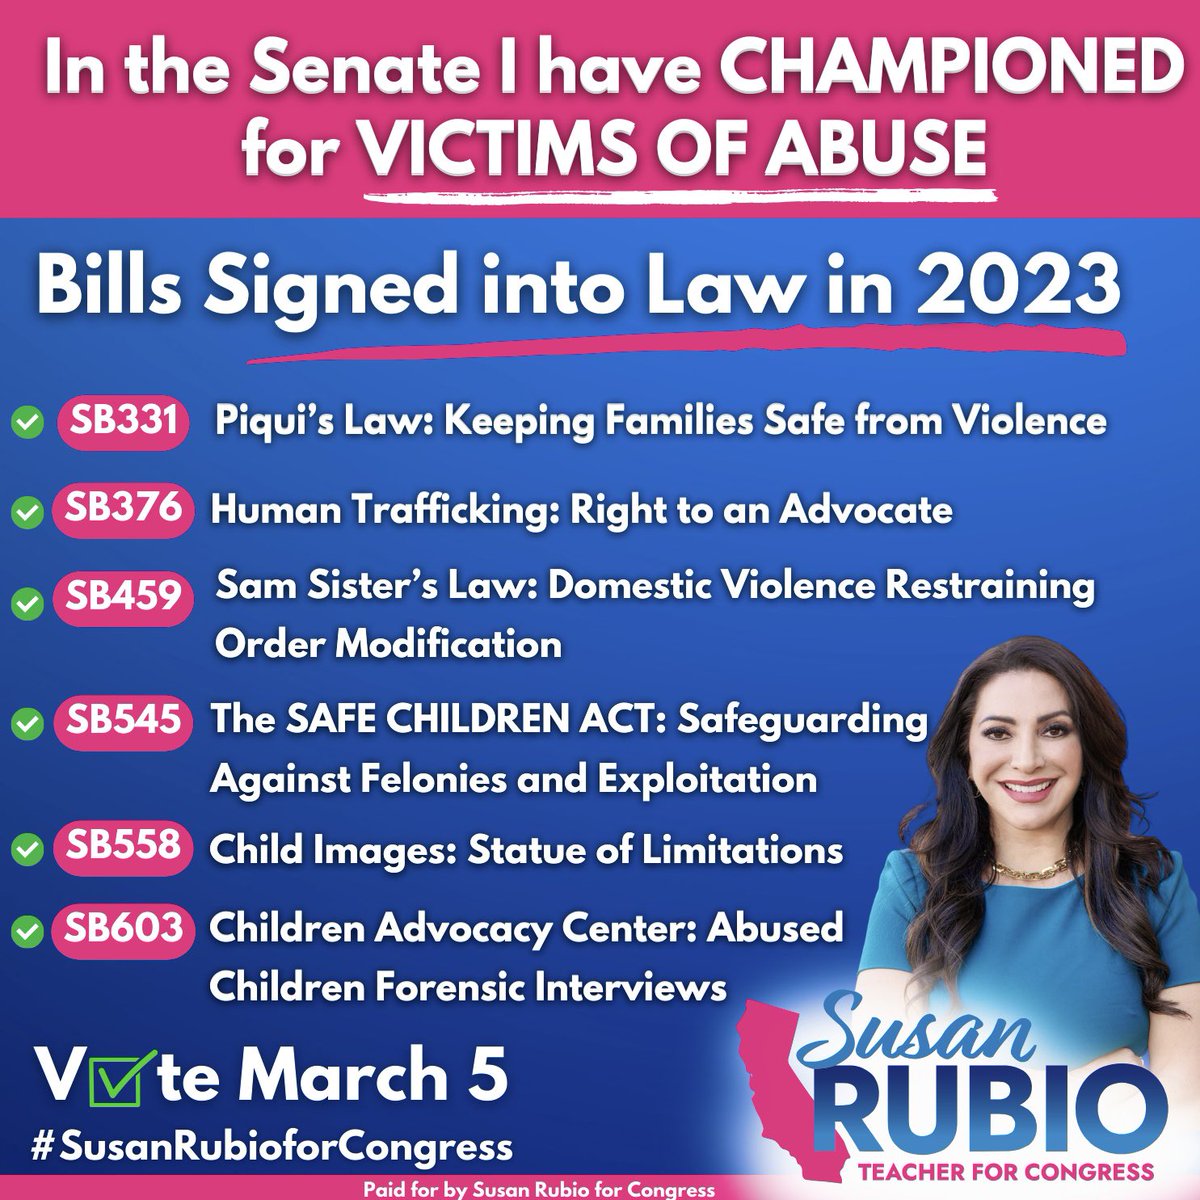 Running for Congress (CA31) to continue our fight for justice and safety. Championed life-saving bills for children, survivors of domestic violence & human trafficking. Join us in creating a thriving, inclusive state. Vote March 5. #SusanRubioforCongress #SGV #ProtectOurChildren